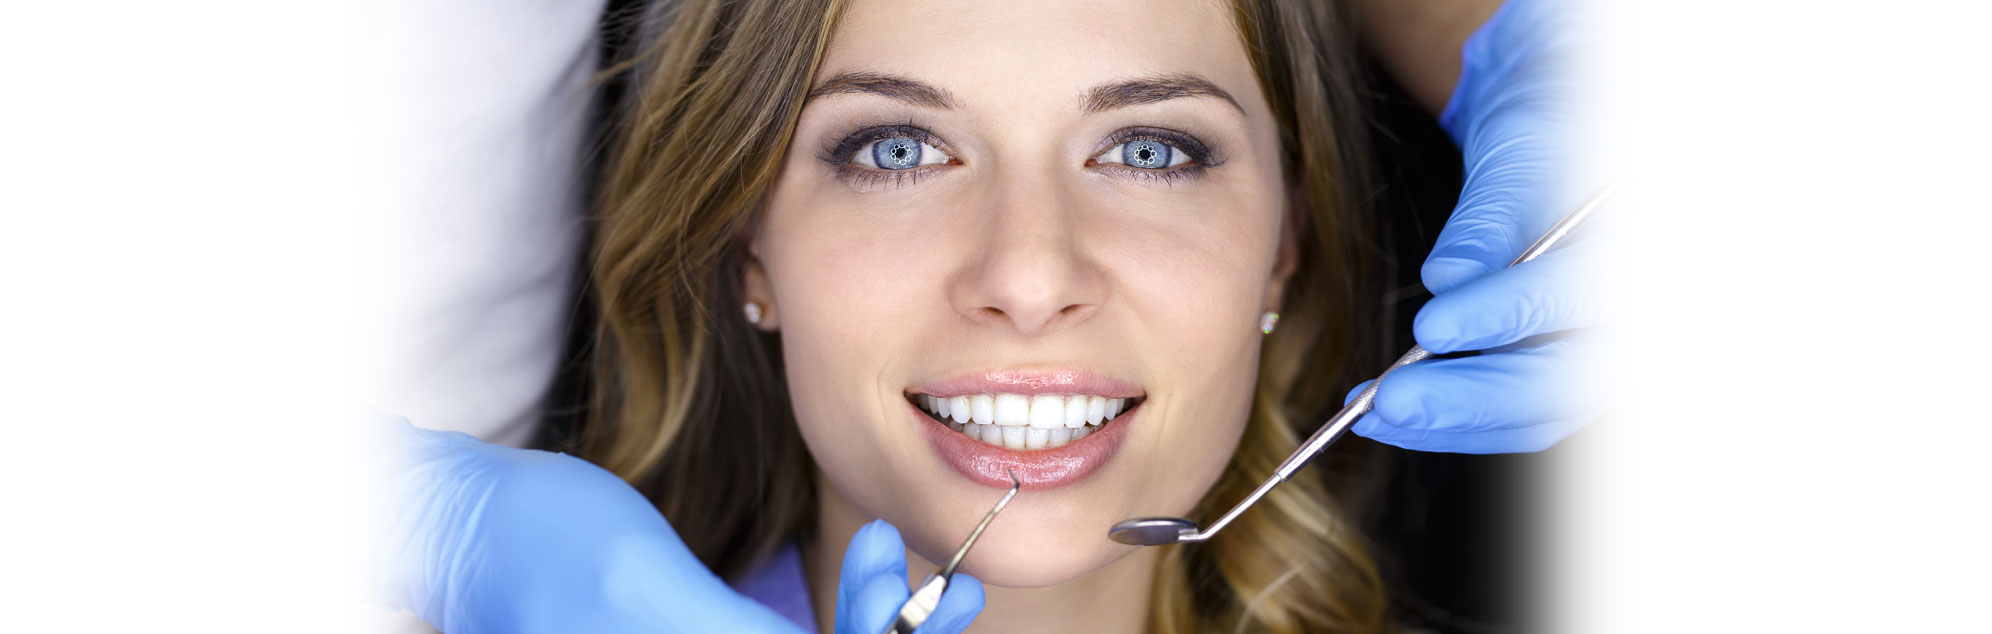 In-office Deep Bleaching…The Most Effective Way to Whiten Teeth